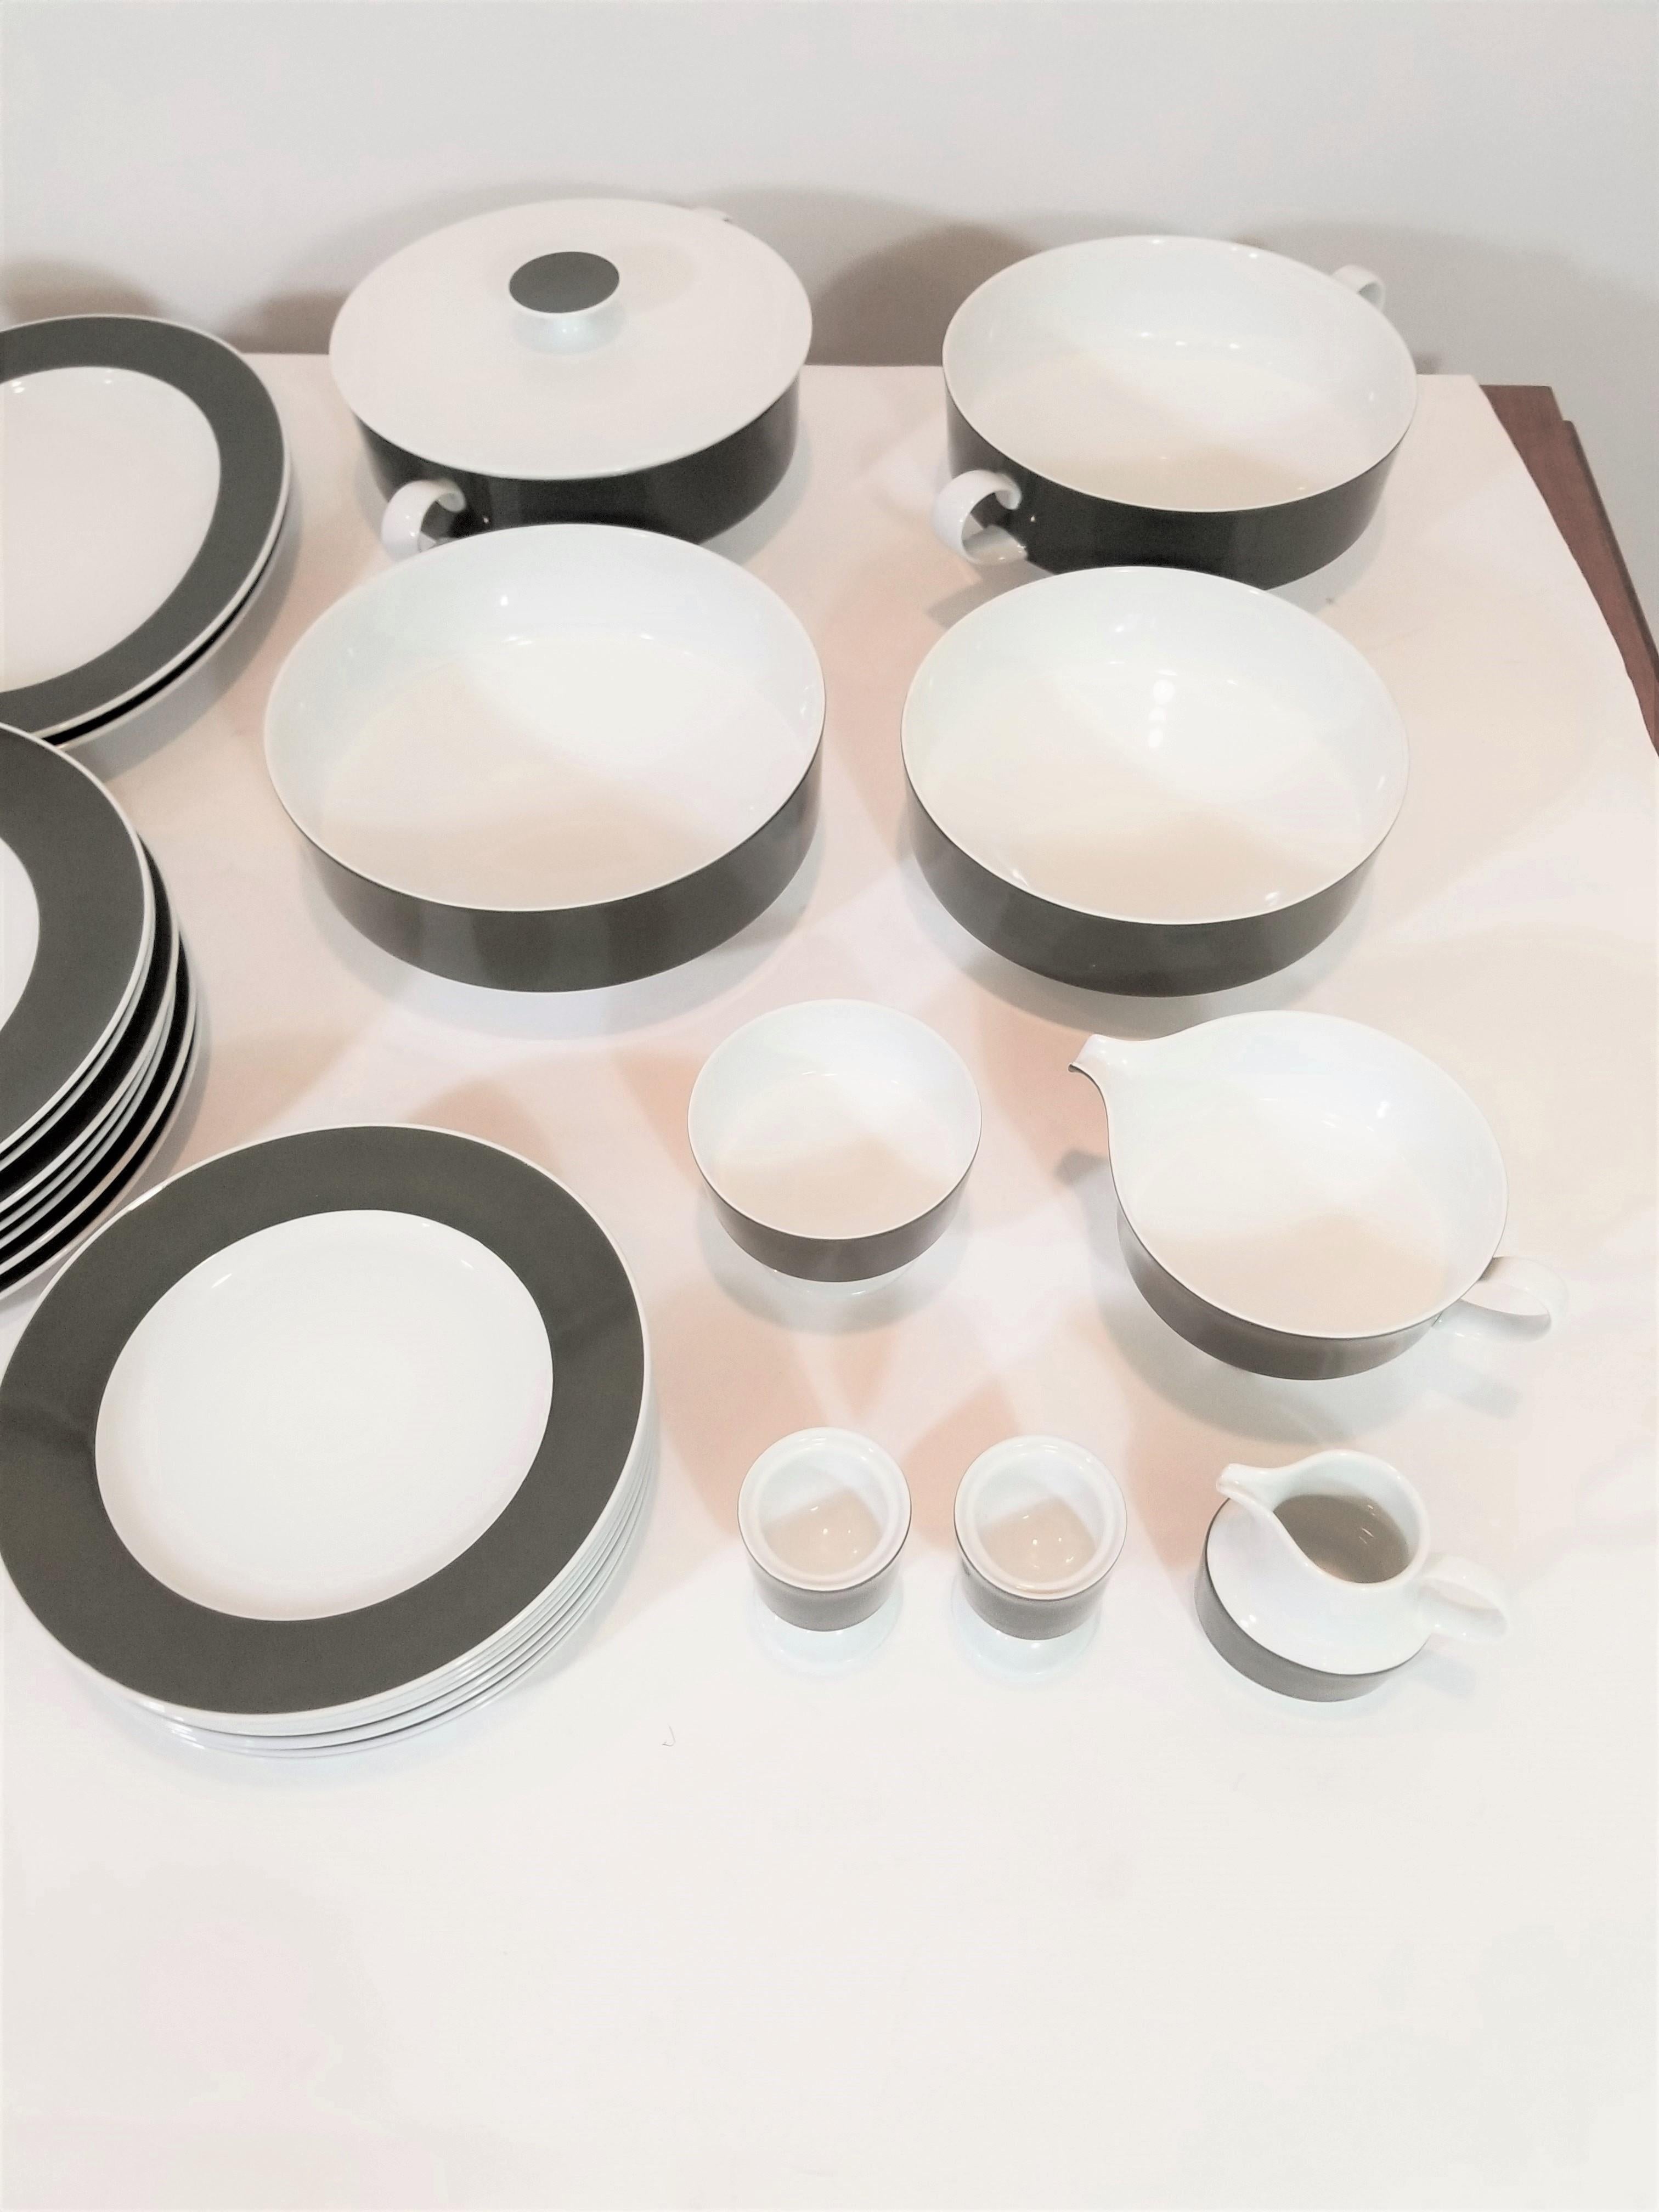 1960 midcentury dinner set consisting of 63 pieces. Elegant and modern design consistent with 1960s midcentury. The Versatile color and design allows for formal use as well as less formal. All pieces are porcelain and Marked Rosenthal. 
Excellent